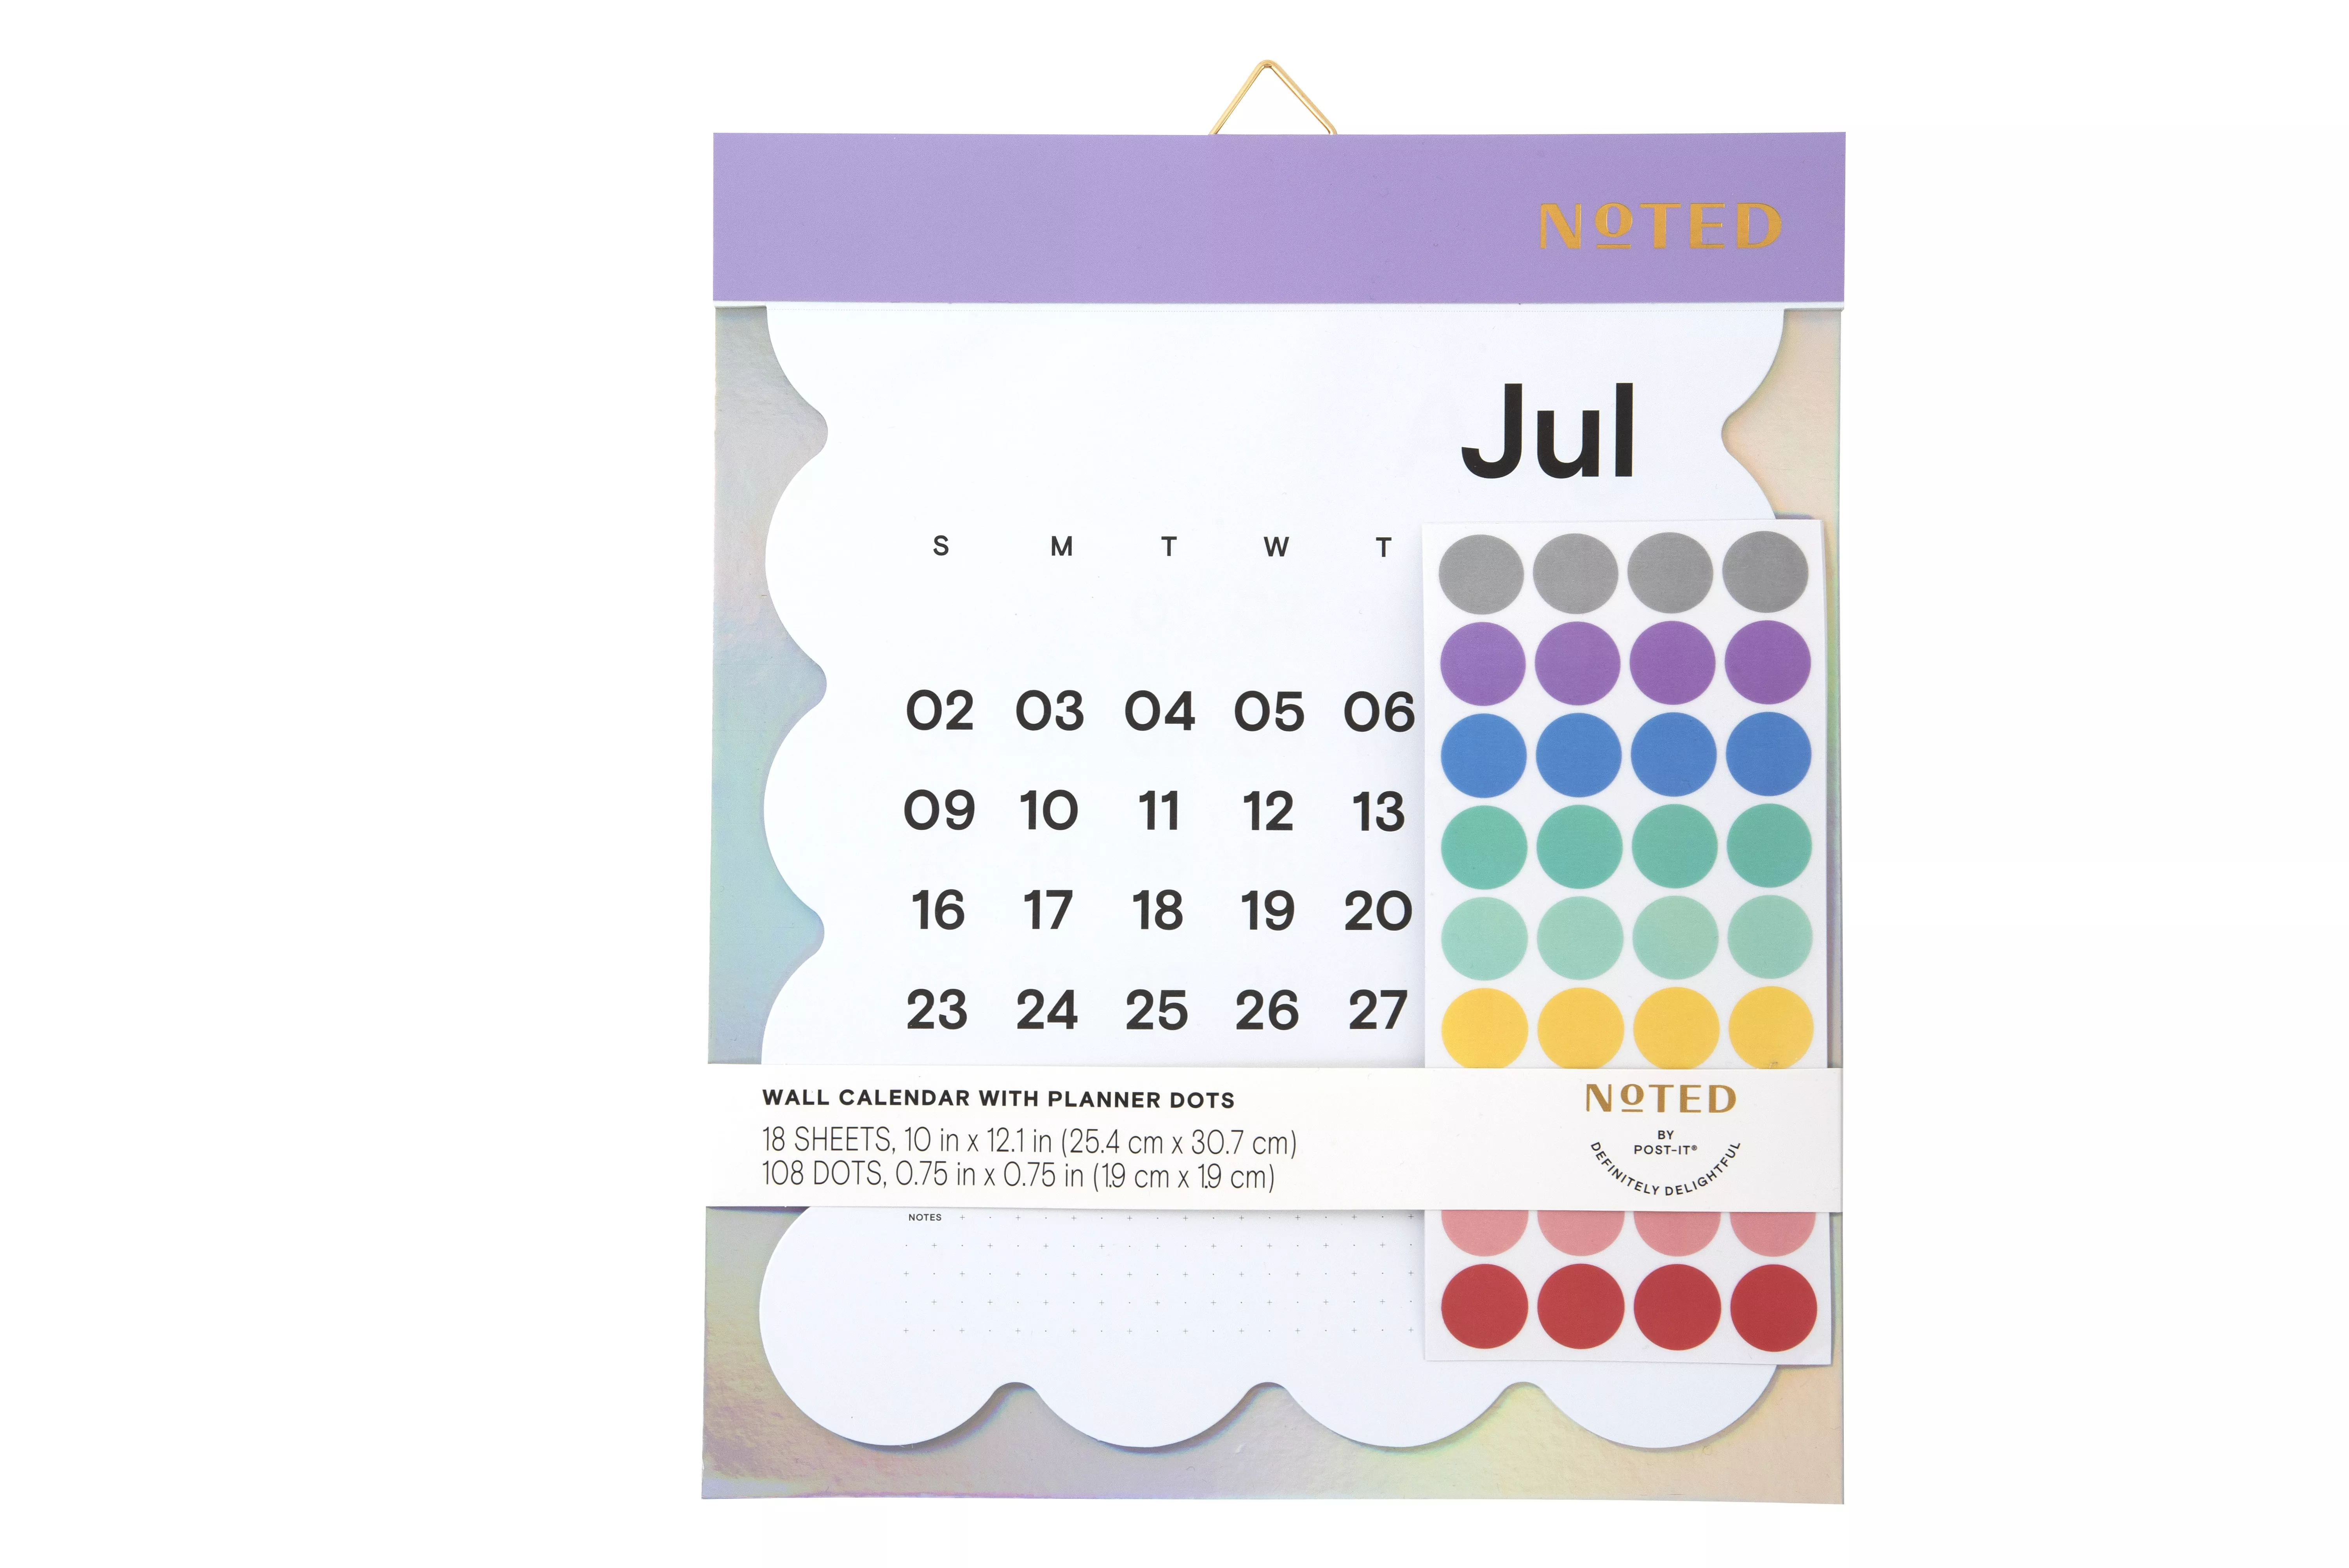 Post-it® Wall Calendar with Planner Dots NTD7-CAL-1, 10 in x 12.5 in (25.4 cm x 31.75 cm)